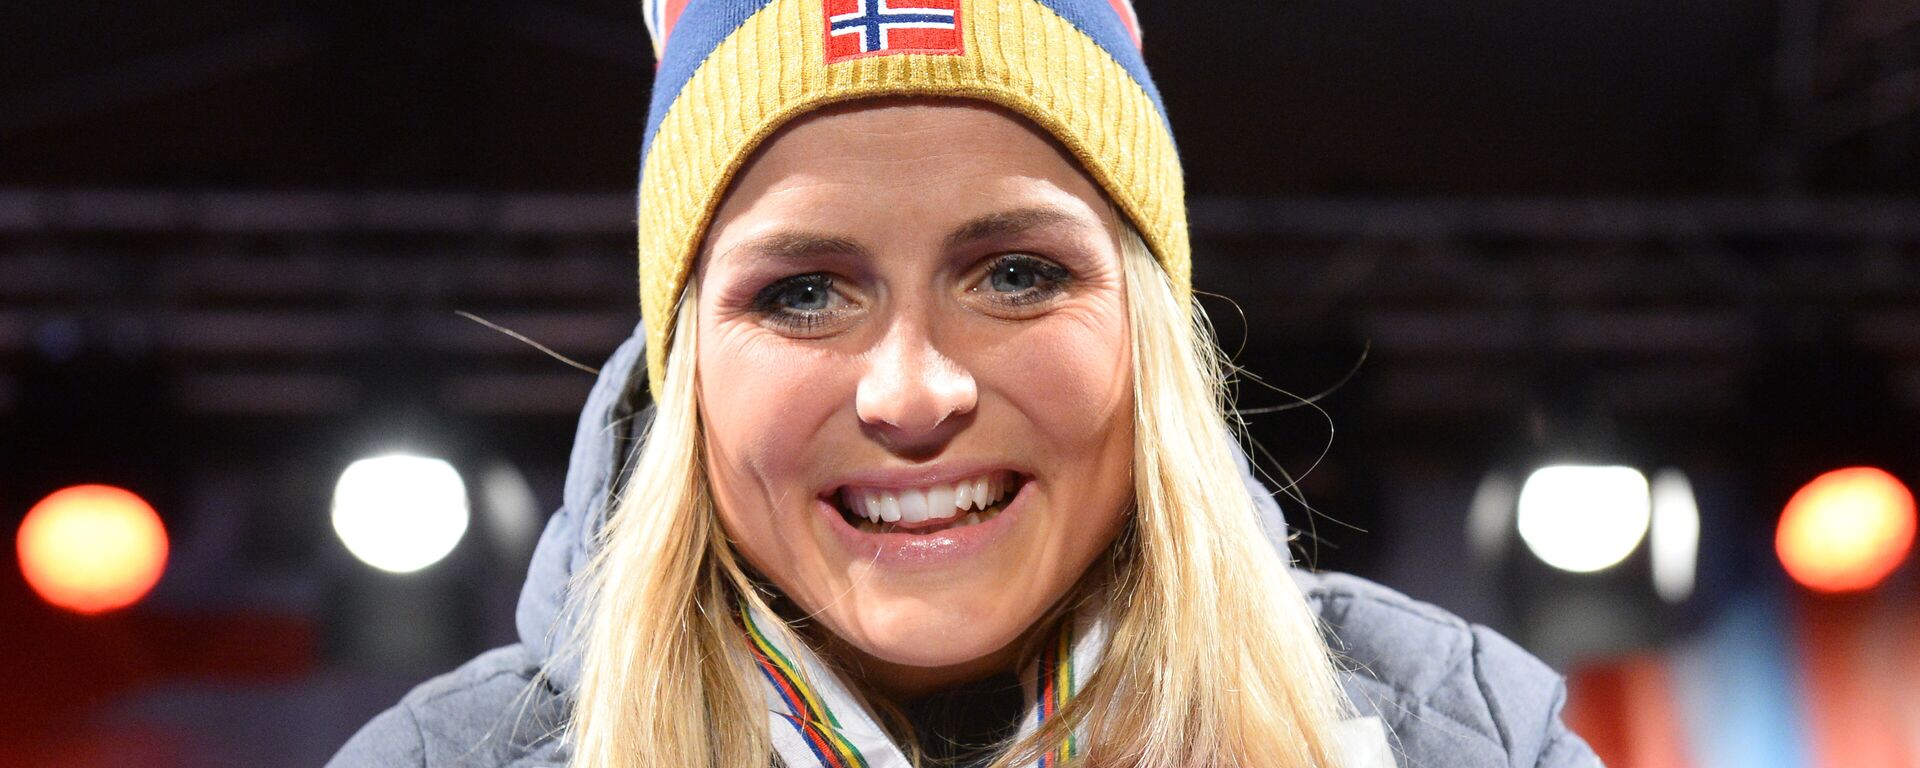 This file photo taken on February 28, 2015 shows Norway's Therese Johaug celebrating with her three gold medals during the medals ceremony of the women's cross country 30 km mass start classic style competition of the 2015 FIS Nordic World Ski Championships in Falun, Sweden. - Sputnik International, 1920, 25.02.2022